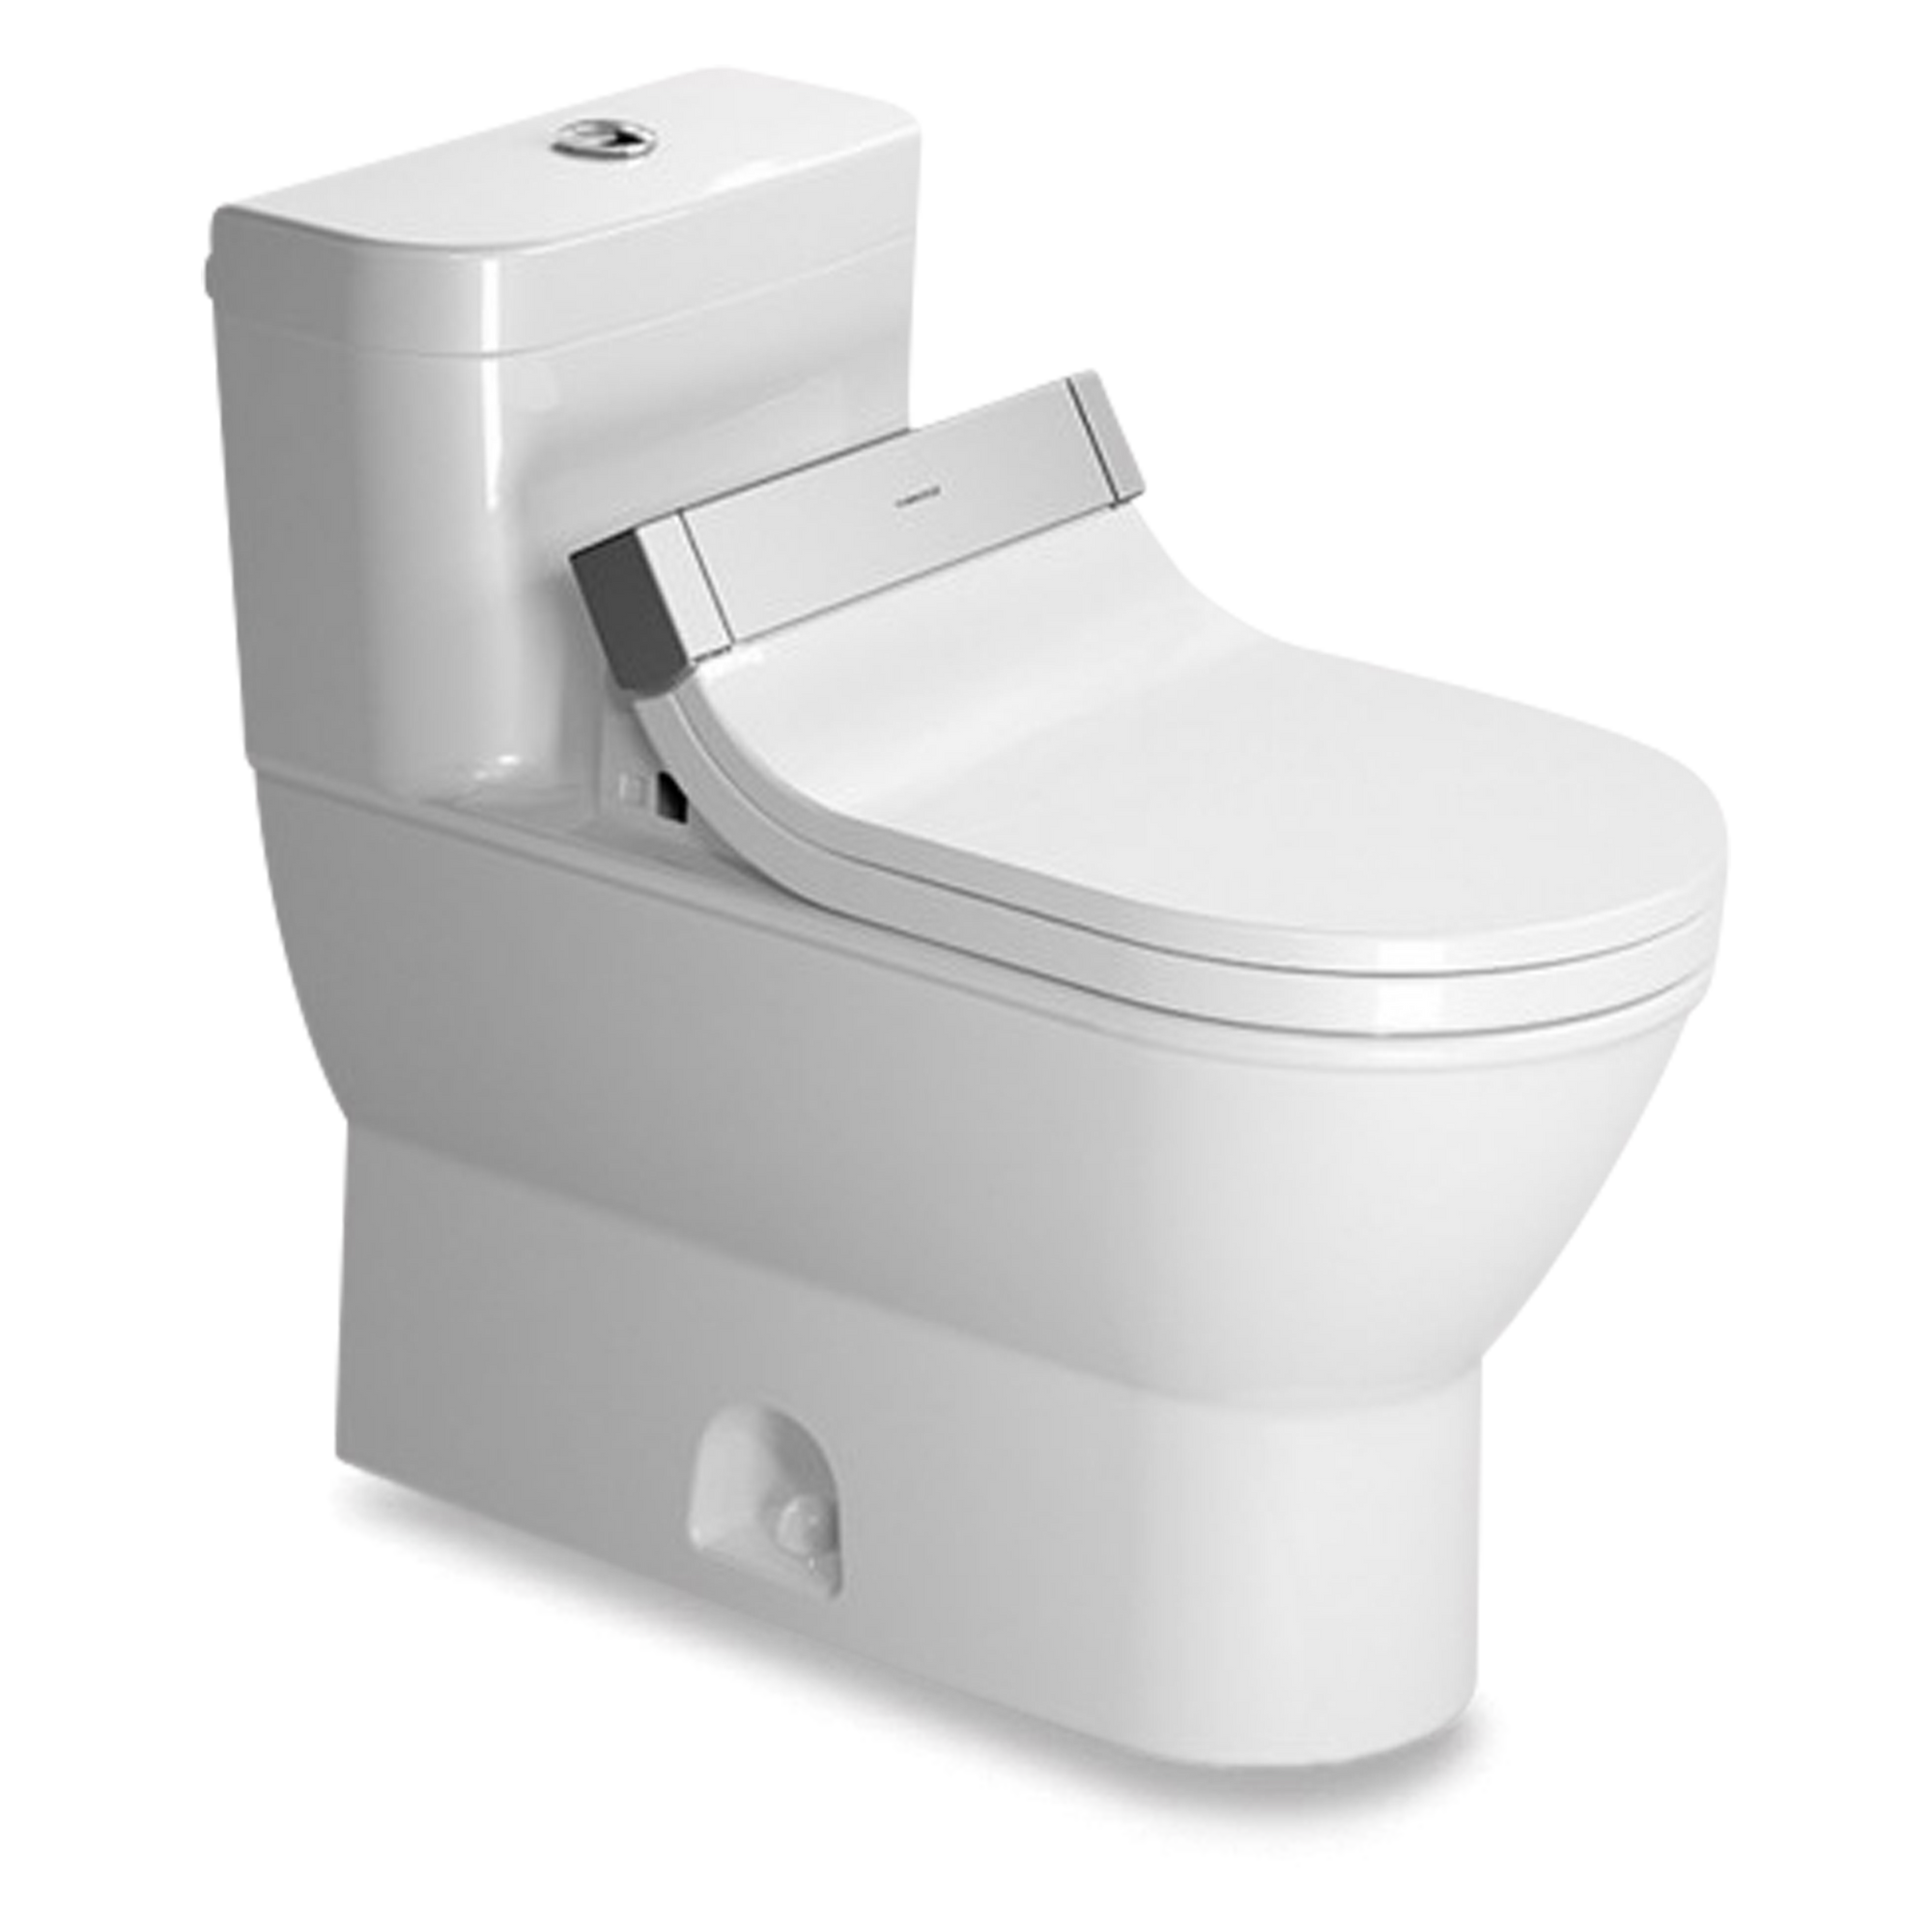 A modern style one-piece toilet designed to accommodate the SensoWash C seat (sold separately).